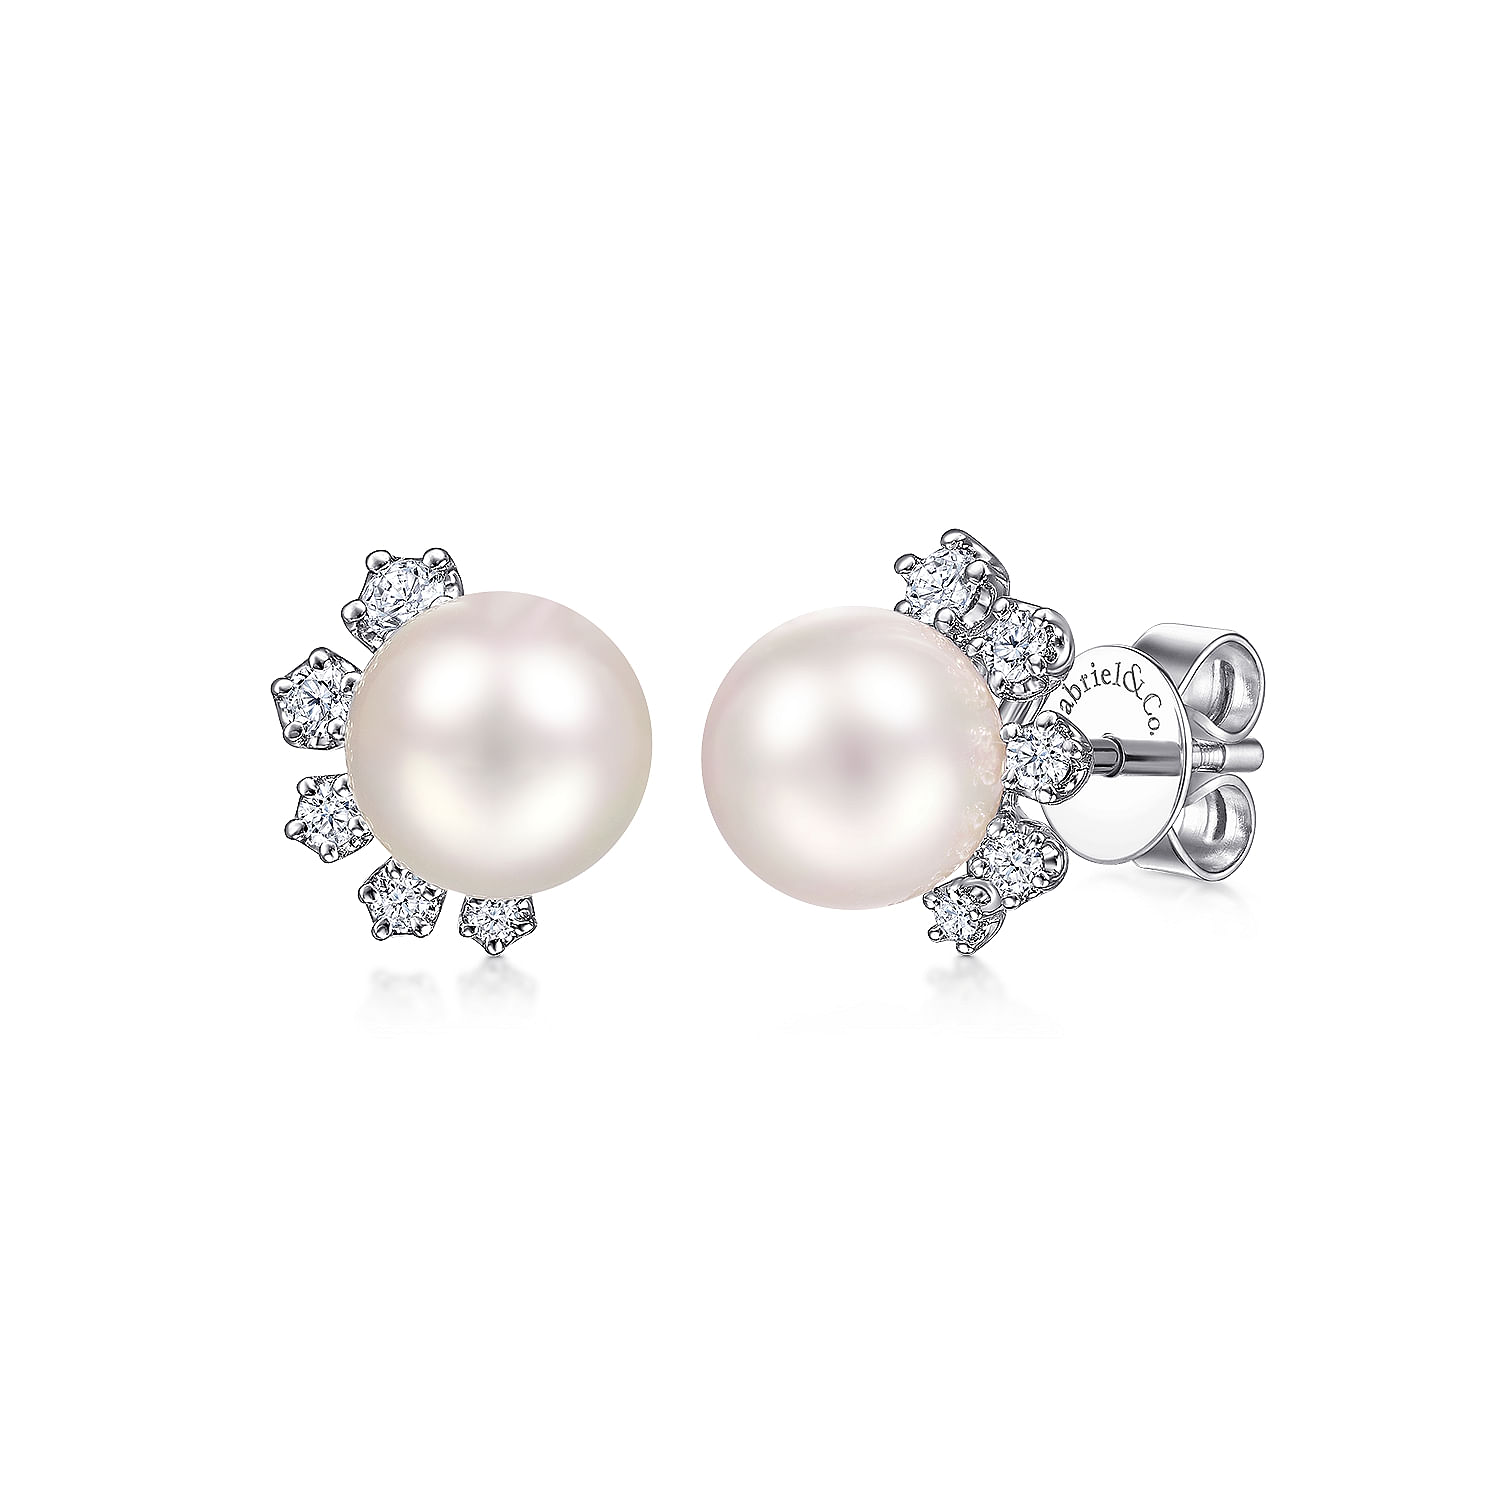 Gabriel - 14K White Gold Pearl Stud Earrings with Diamond Accents